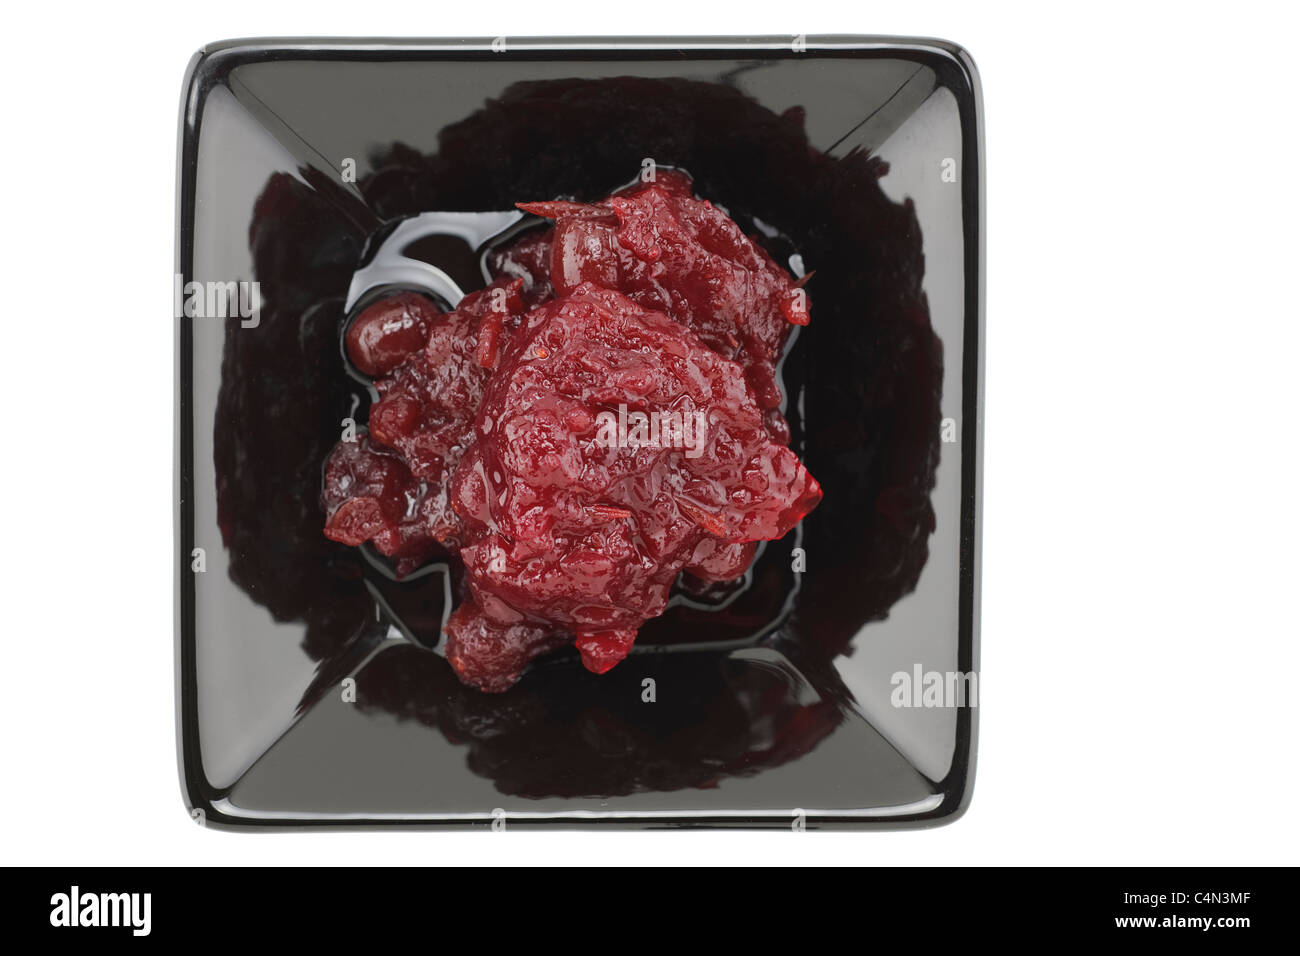 Cranberry sauce in a black serving dish Stock Photo